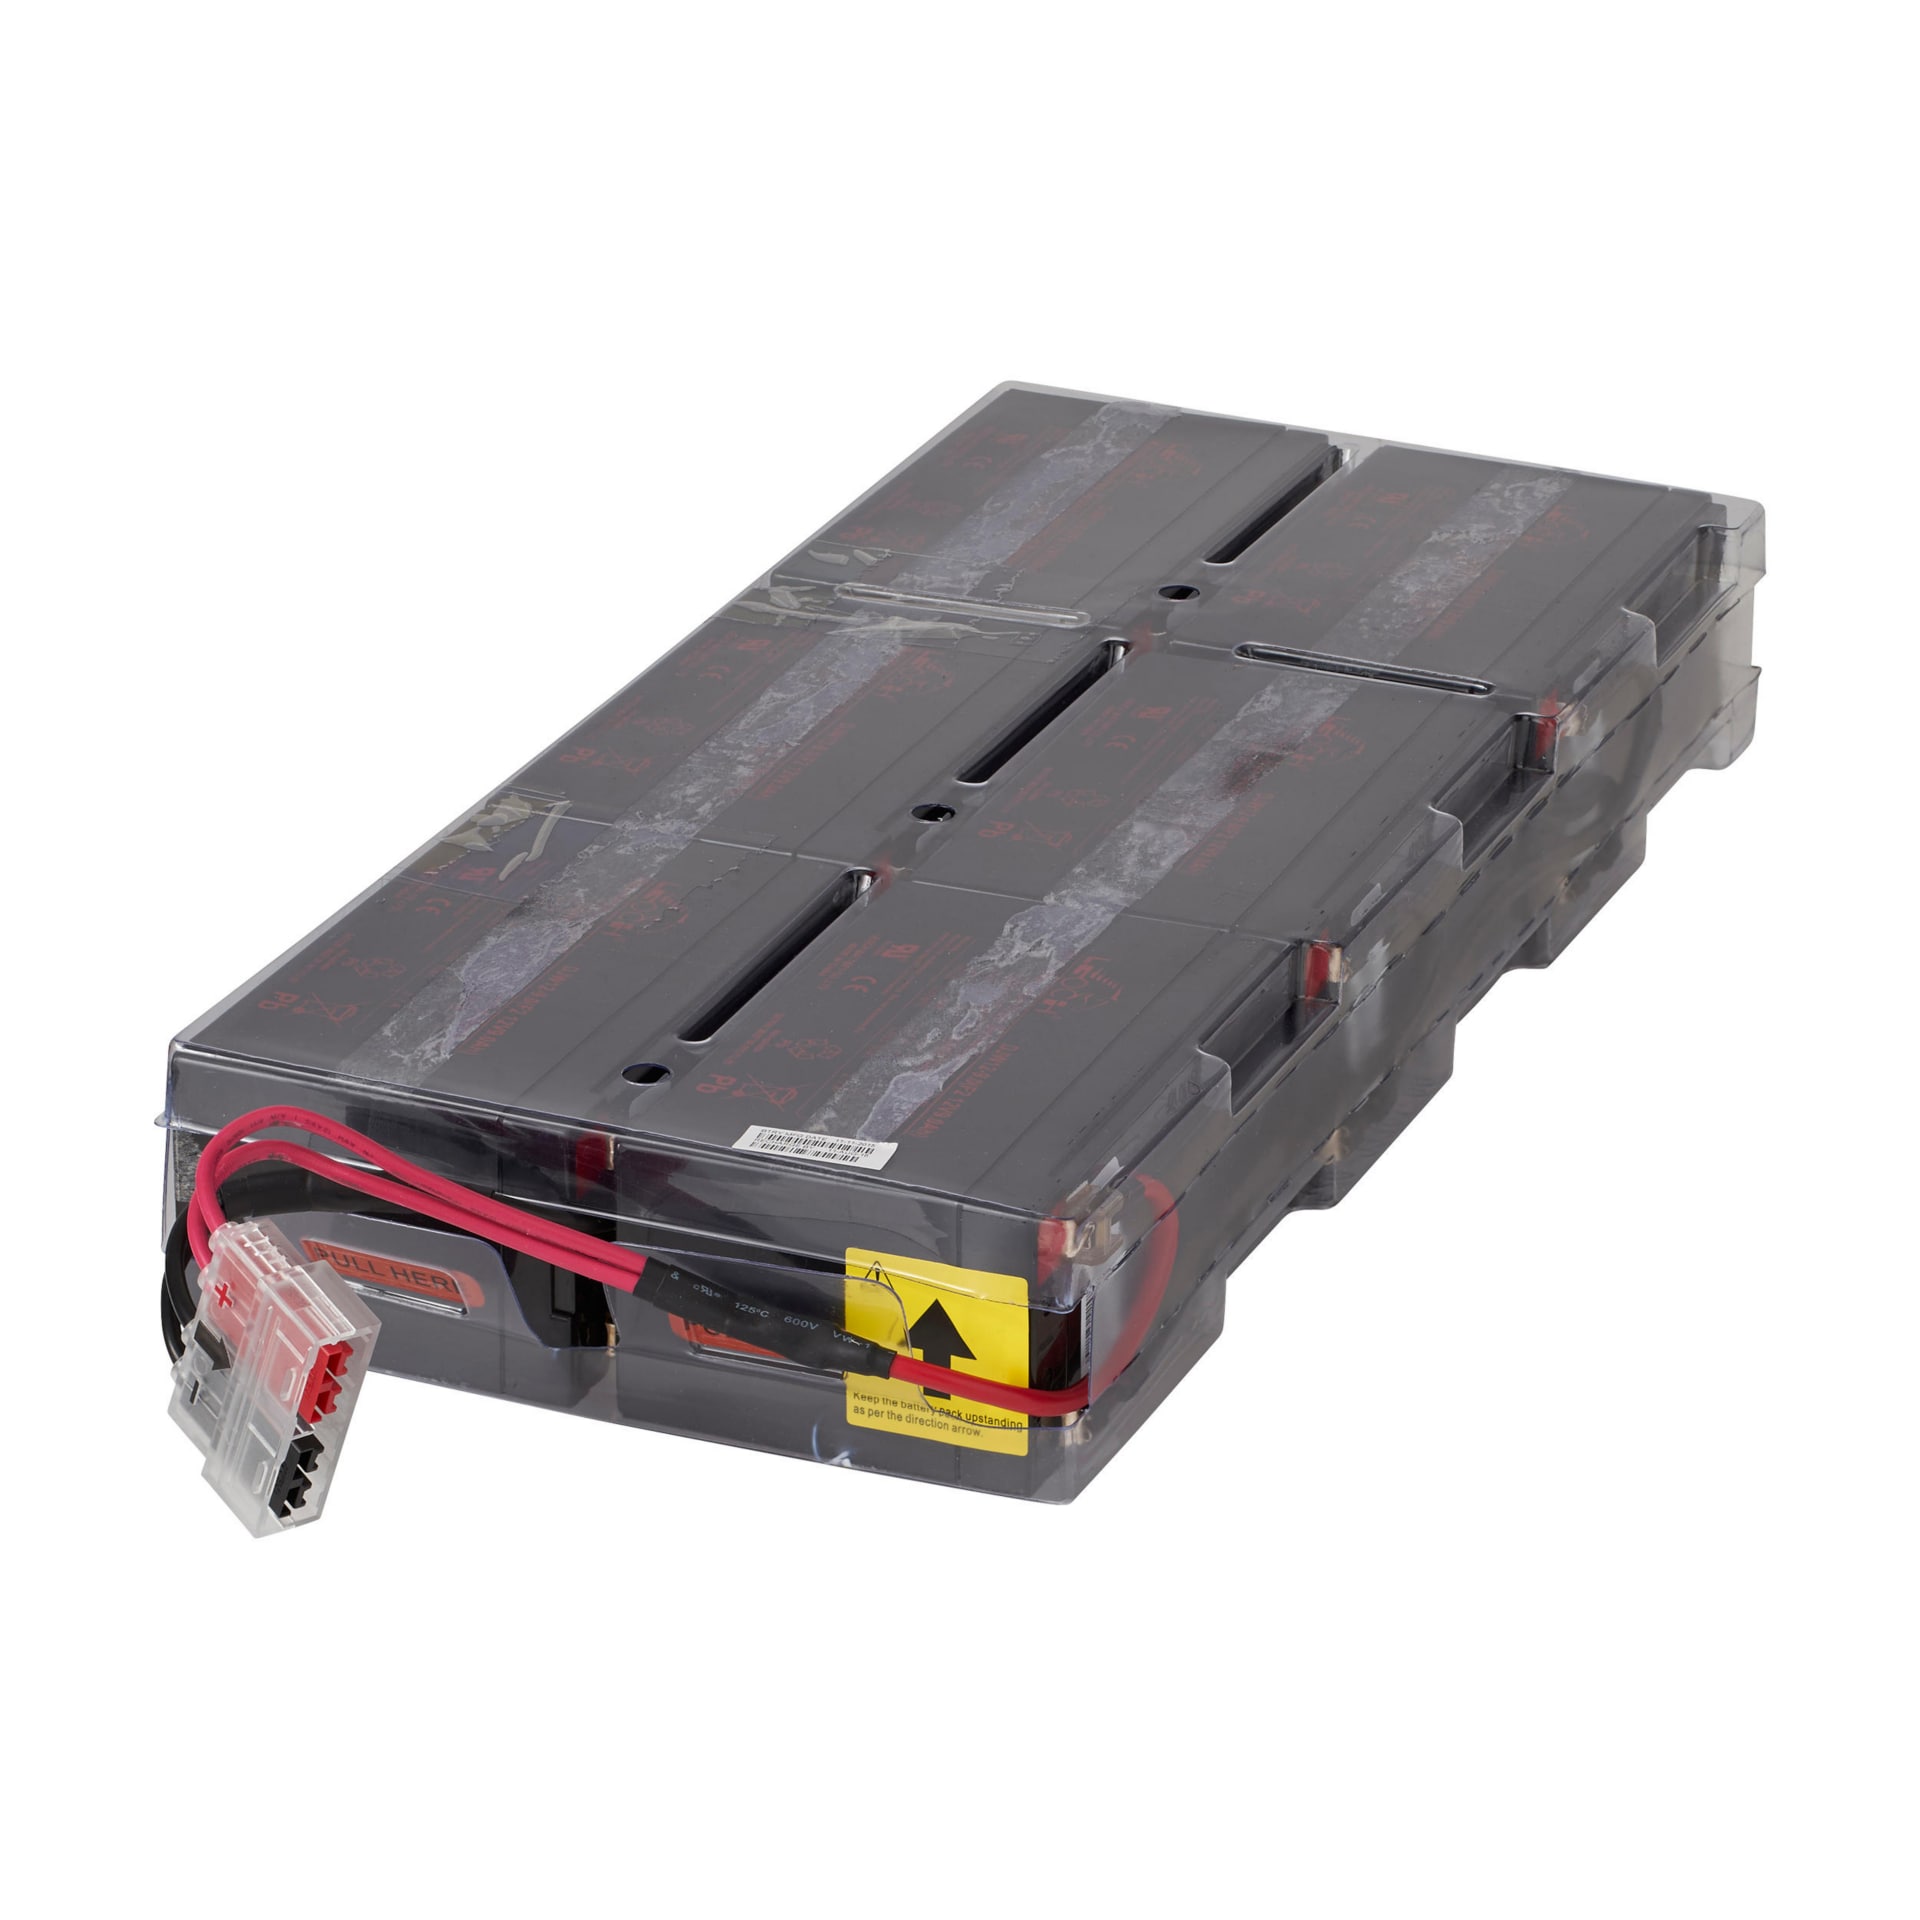 Eaton Internal Replacement Battery Cartridge (RBC) for Select 8kVA to 11kVA 9PX UPS Systems and EBMs